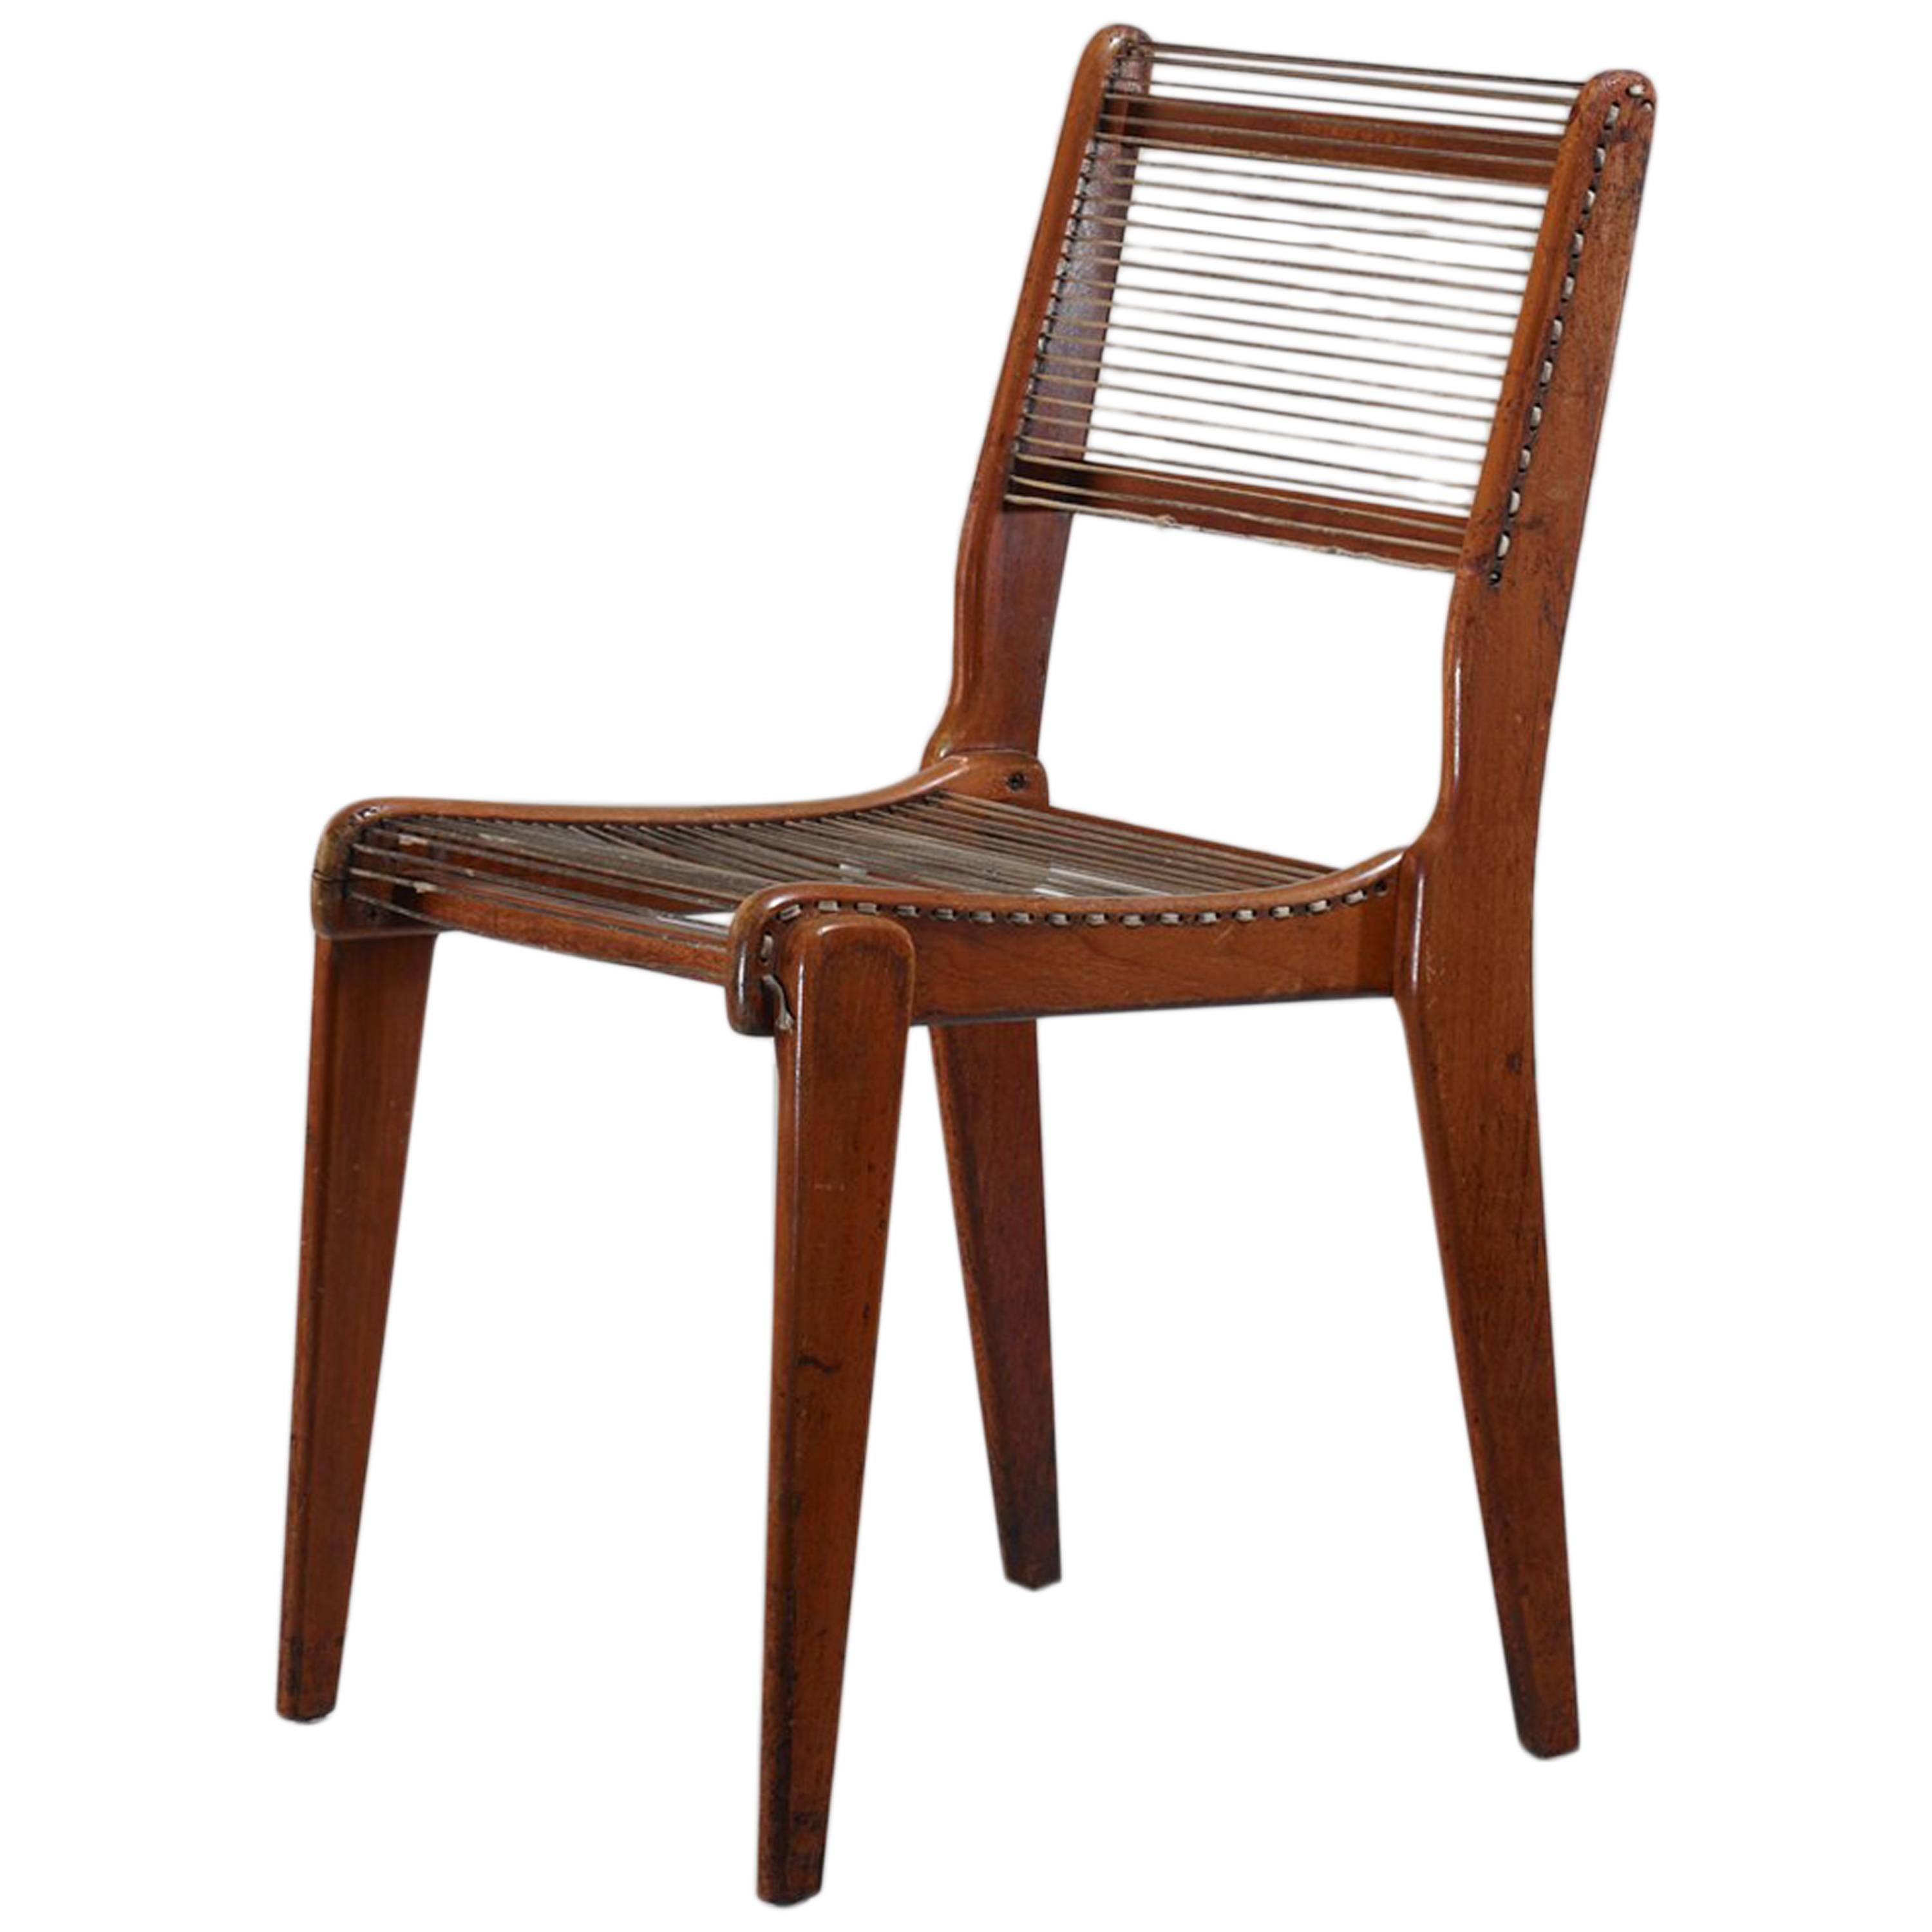 Elegant Studio Crafted Side Chair with a Woven String Seating, USA